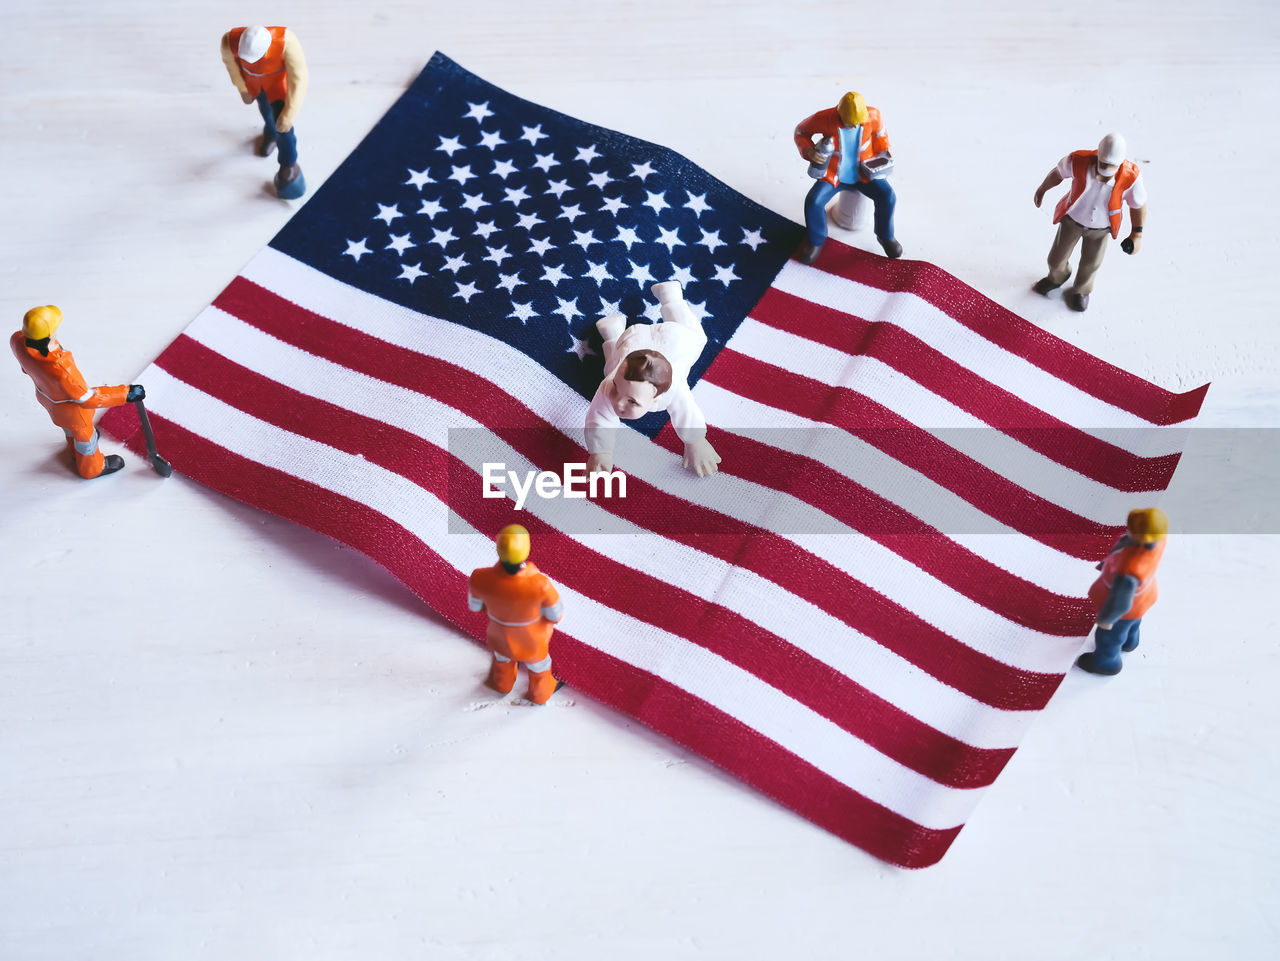 HIGH ANGLE VIEW OF PEOPLE STANDING ON SNOW COVERED FLAG